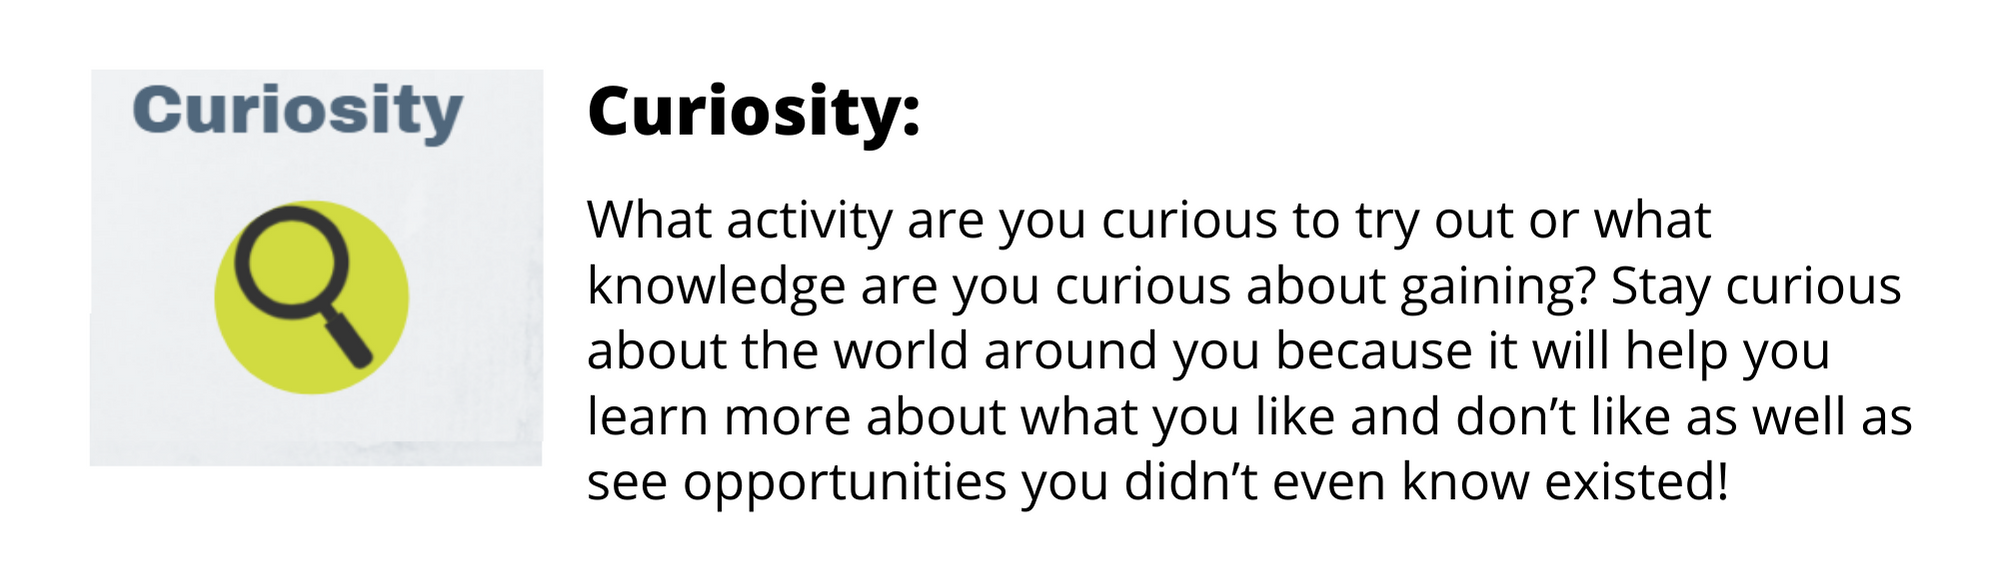 What activity are you curious to try out or what knowledge are you curious about gaining? Stay curious about the world around you because it will help you learn more about what you like and don’t like as well as see opportunities you didn’t even know existed!